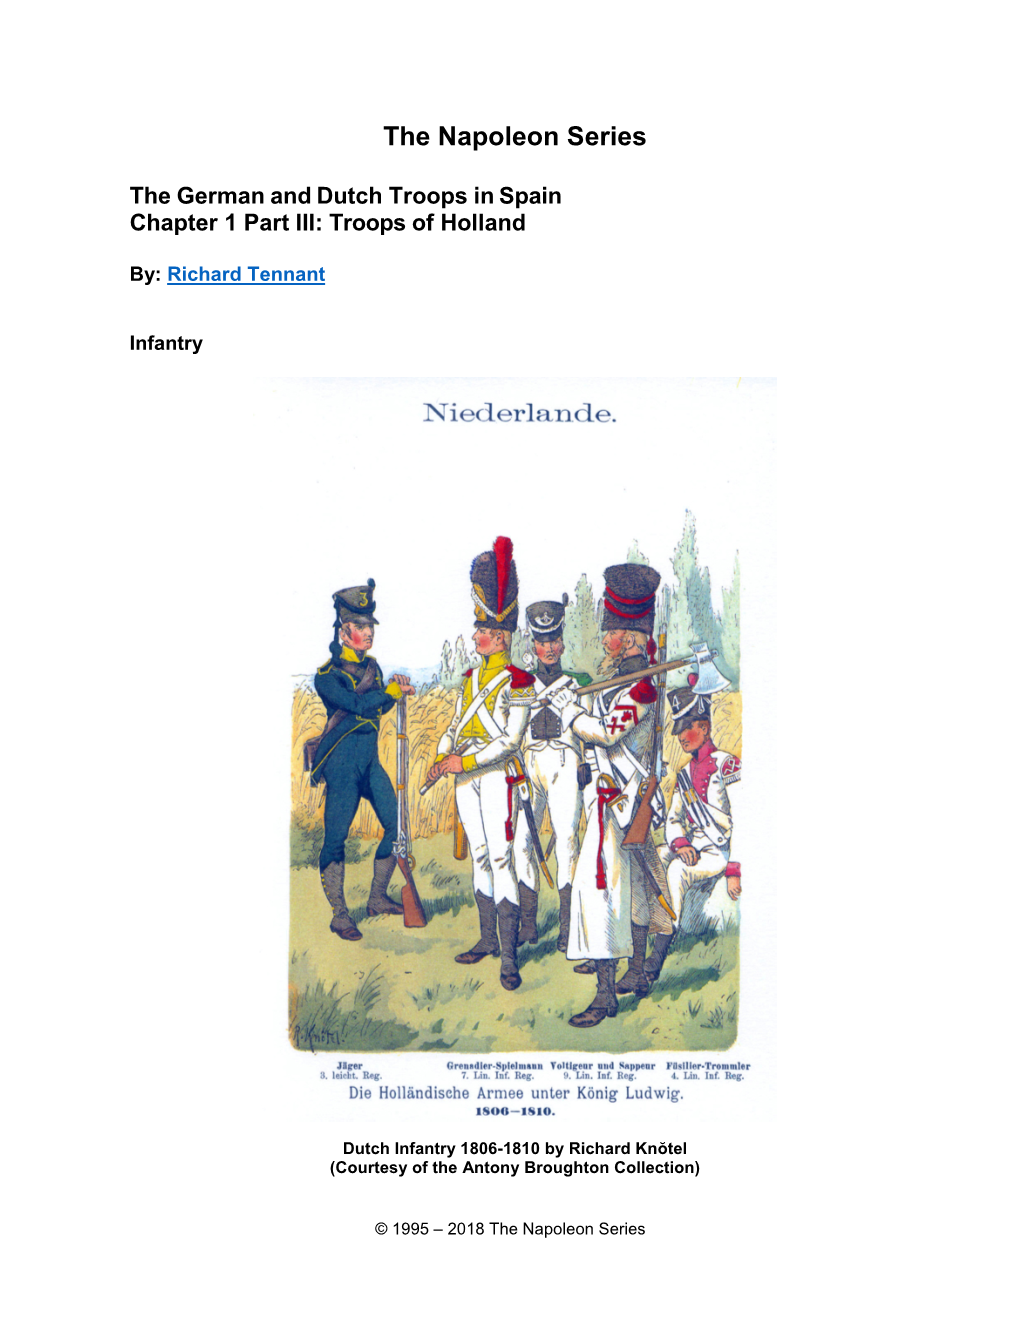 The German and Dutch Troops in Spain Chapter 1 Part III: Troops of Holland